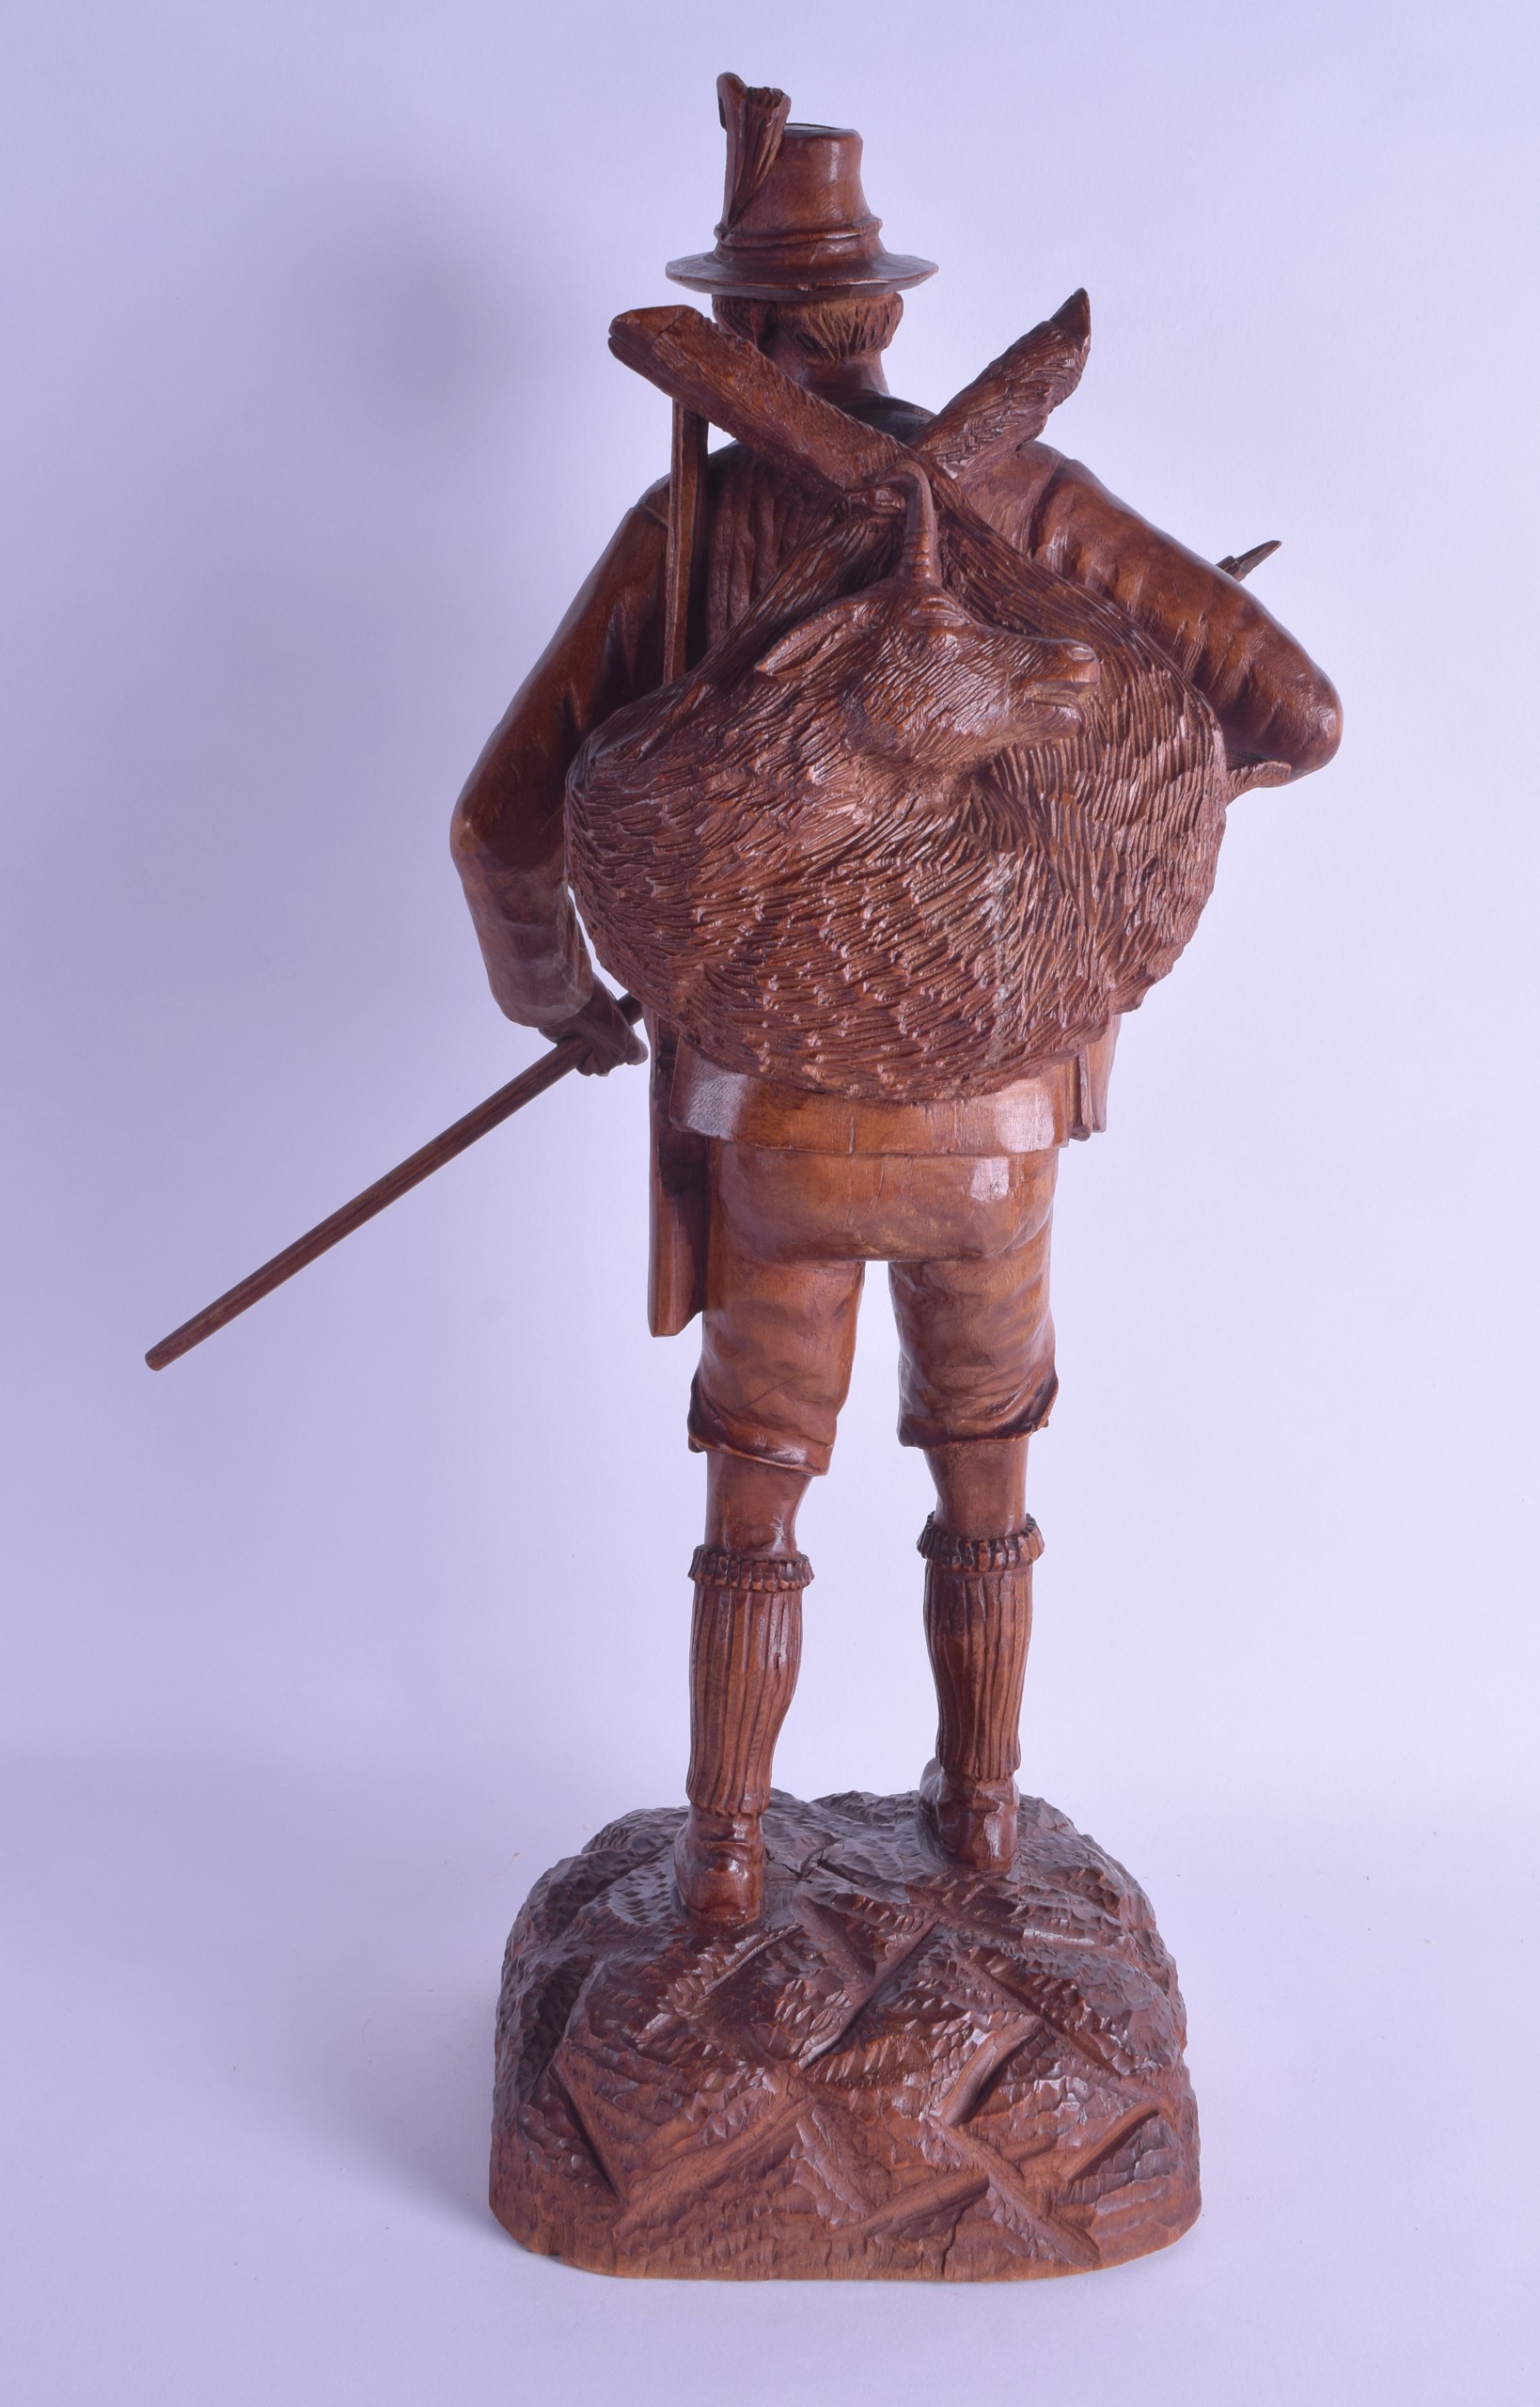 A LARGE EARLY 20TH CENTURY BAVARIAN BLACK FOREST FIGURE OF A HUNTER modelled upon a naturalistic - Image 2 of 3